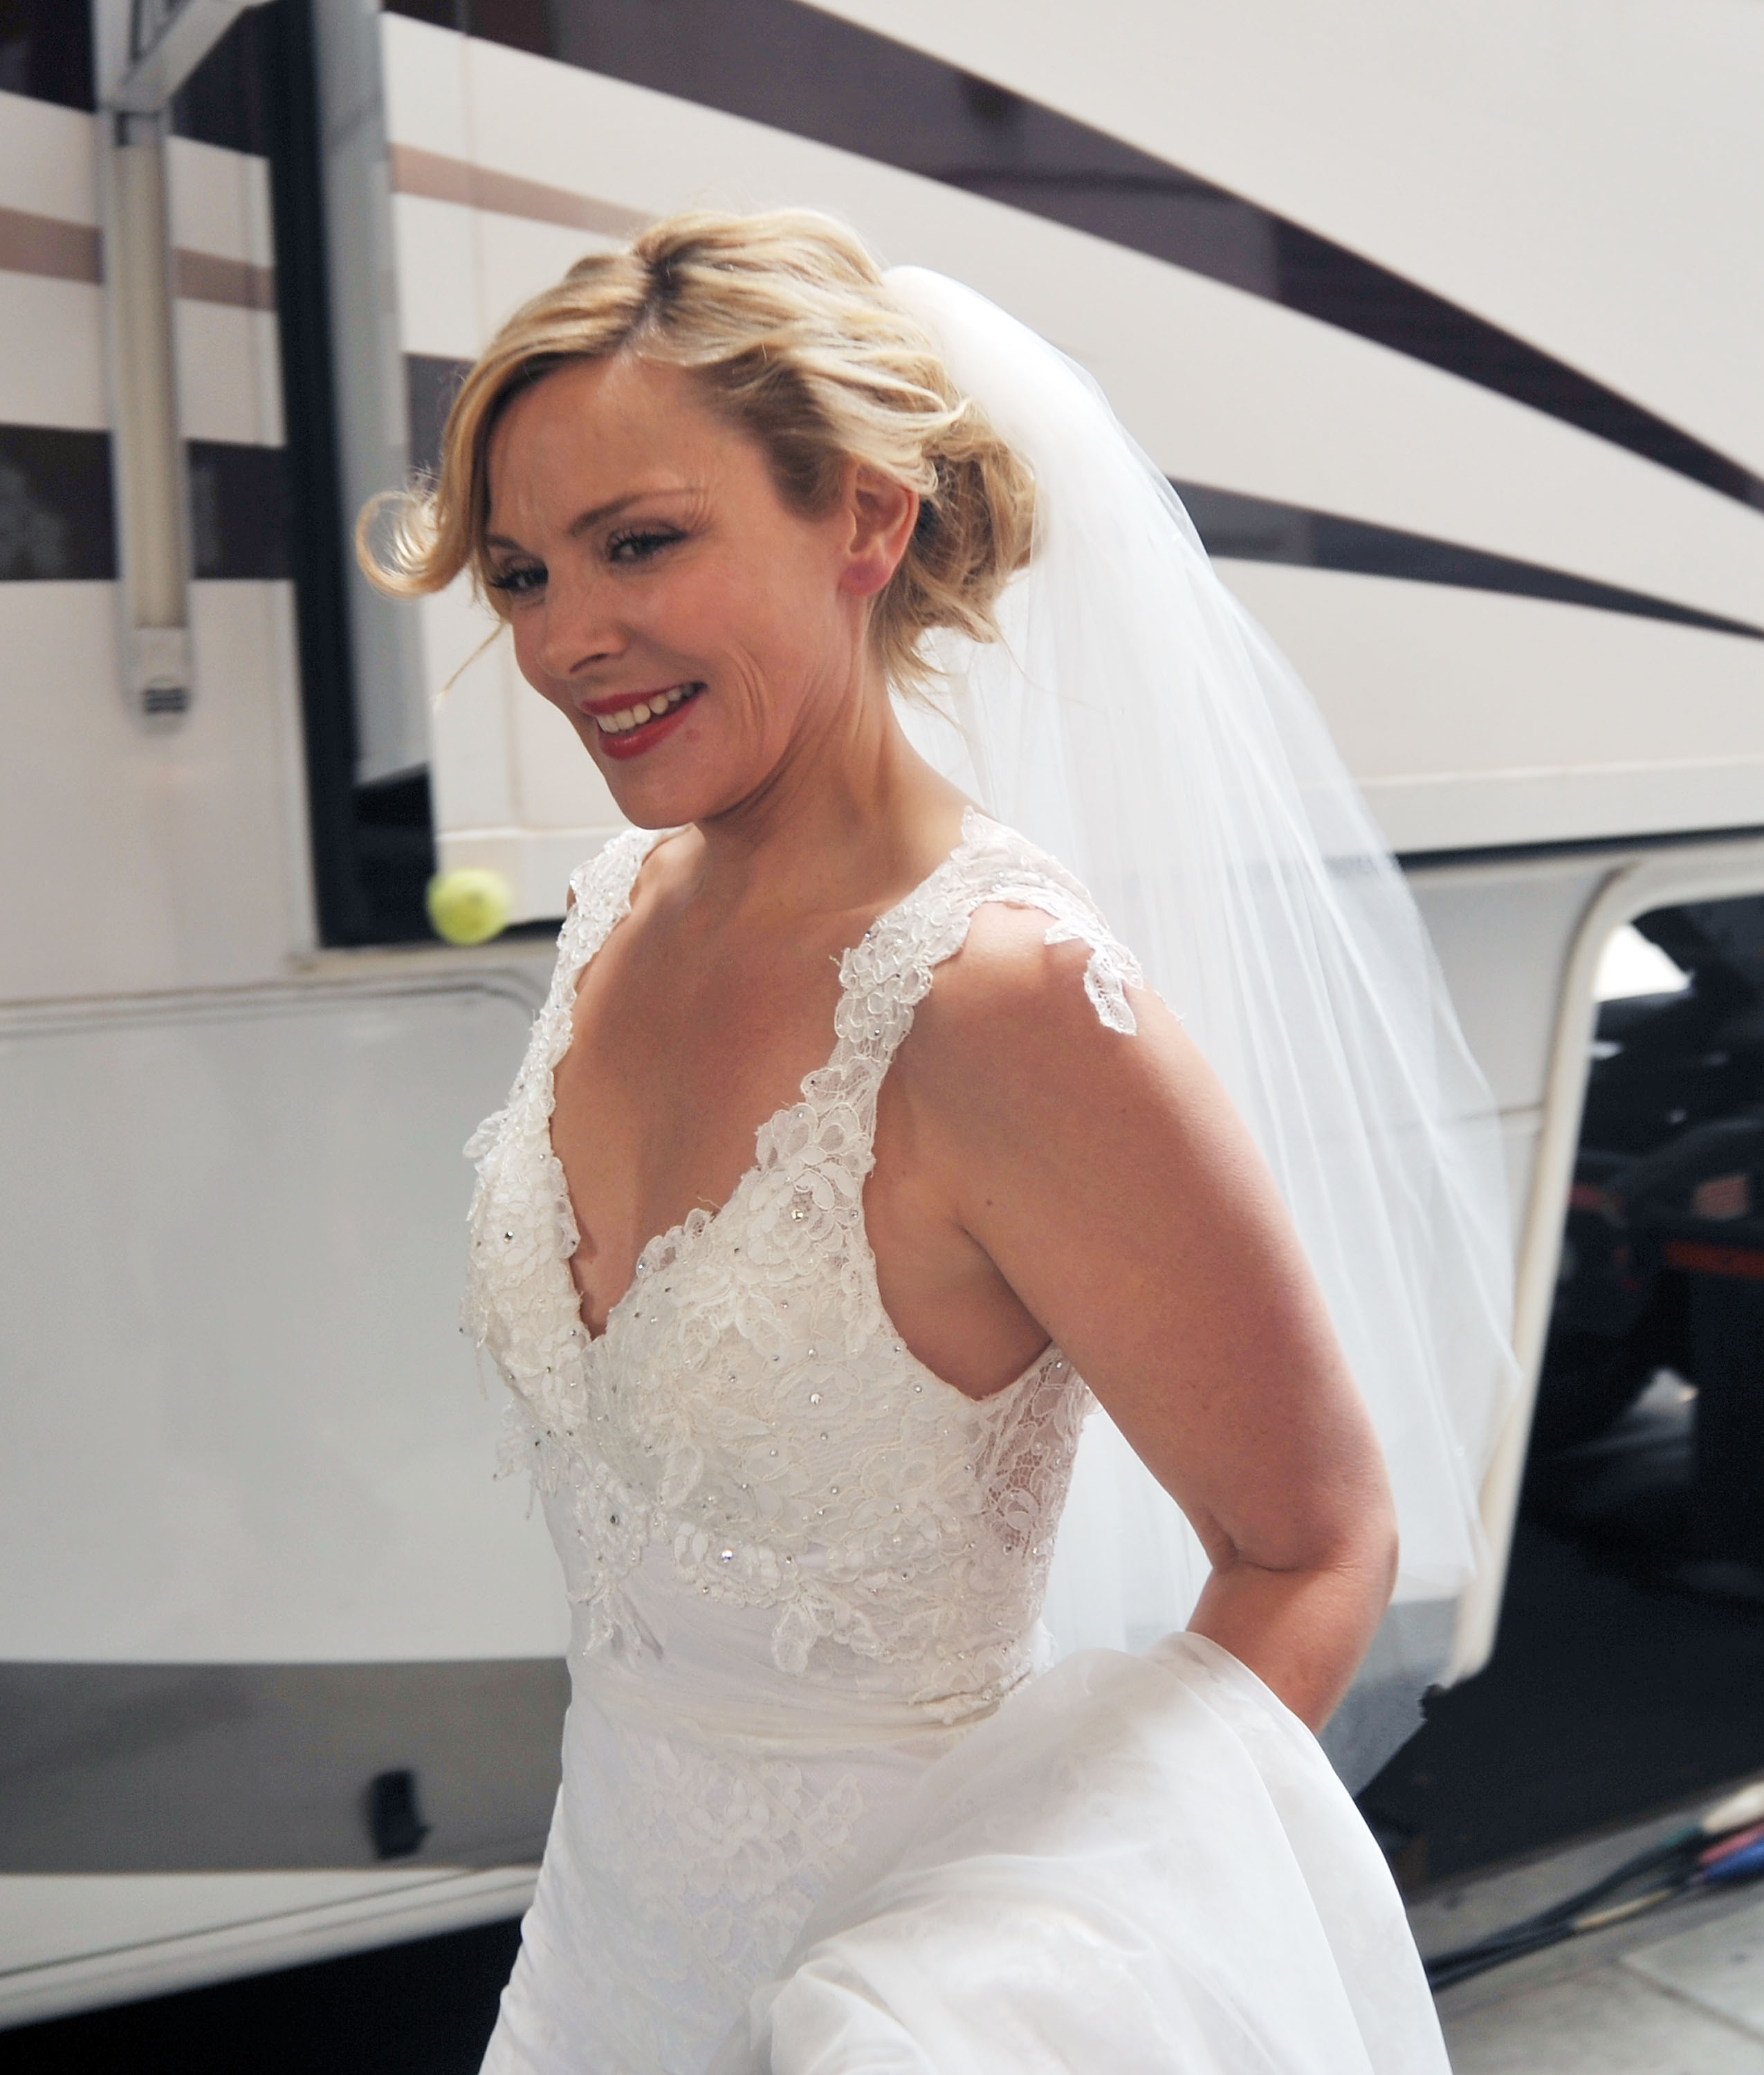 Kim Cattrall is seen wearing a wedding gown on the set of 'Sex and the City 2' in 2008